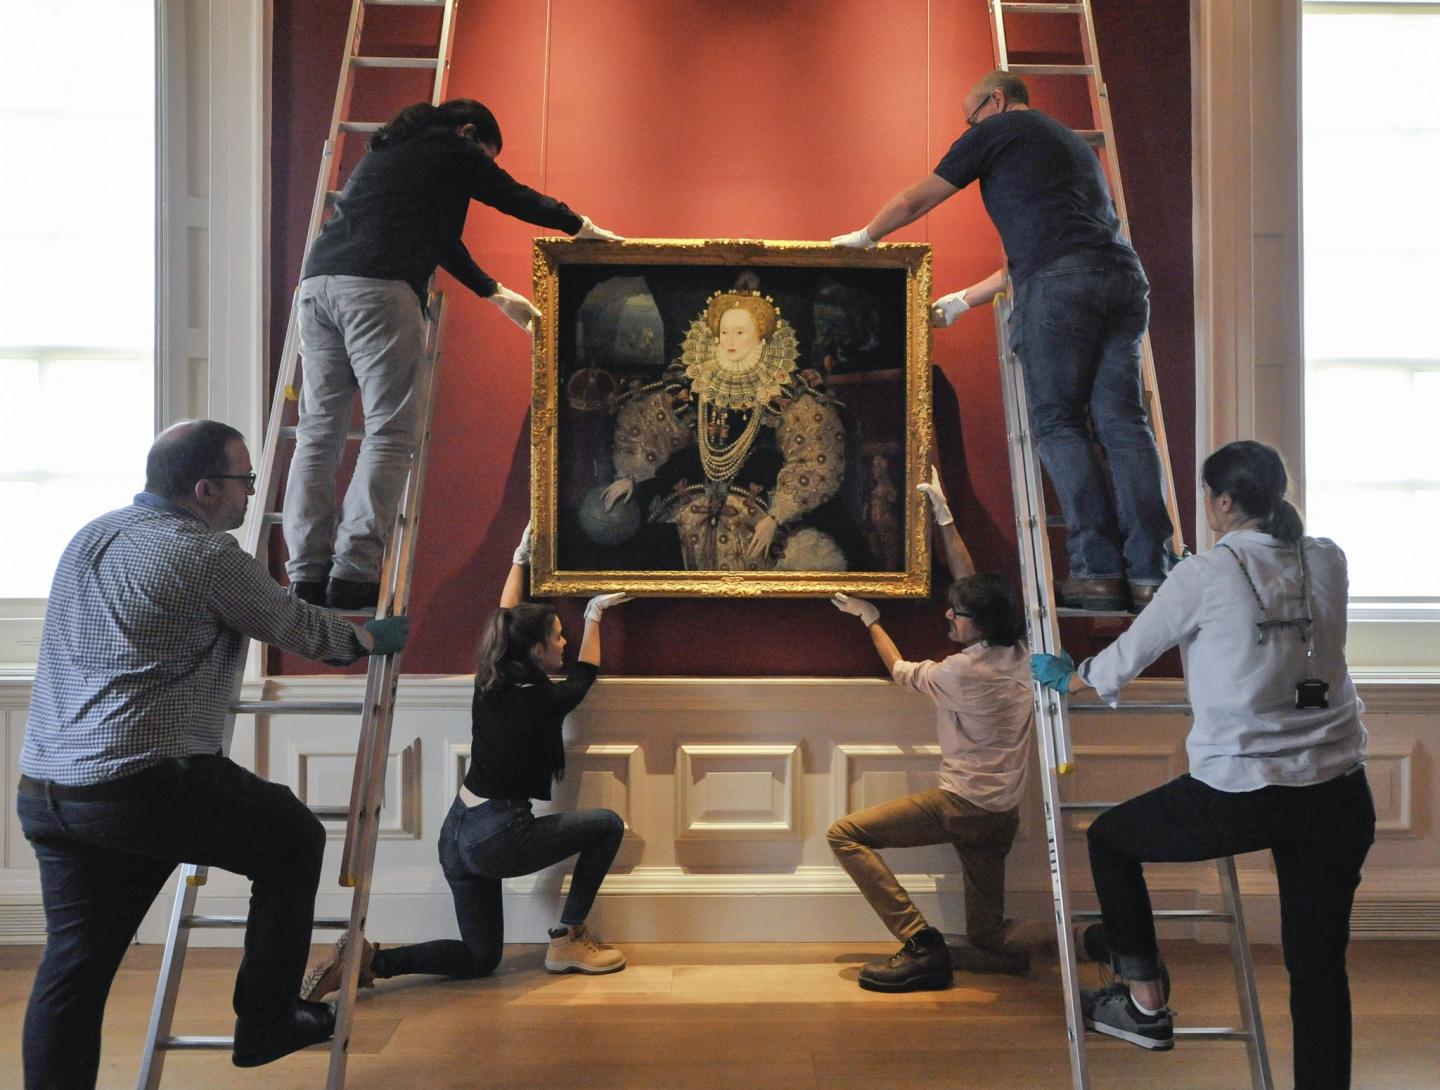 The Armada Portrait of Elizabeth I going back on display in the Queen's House